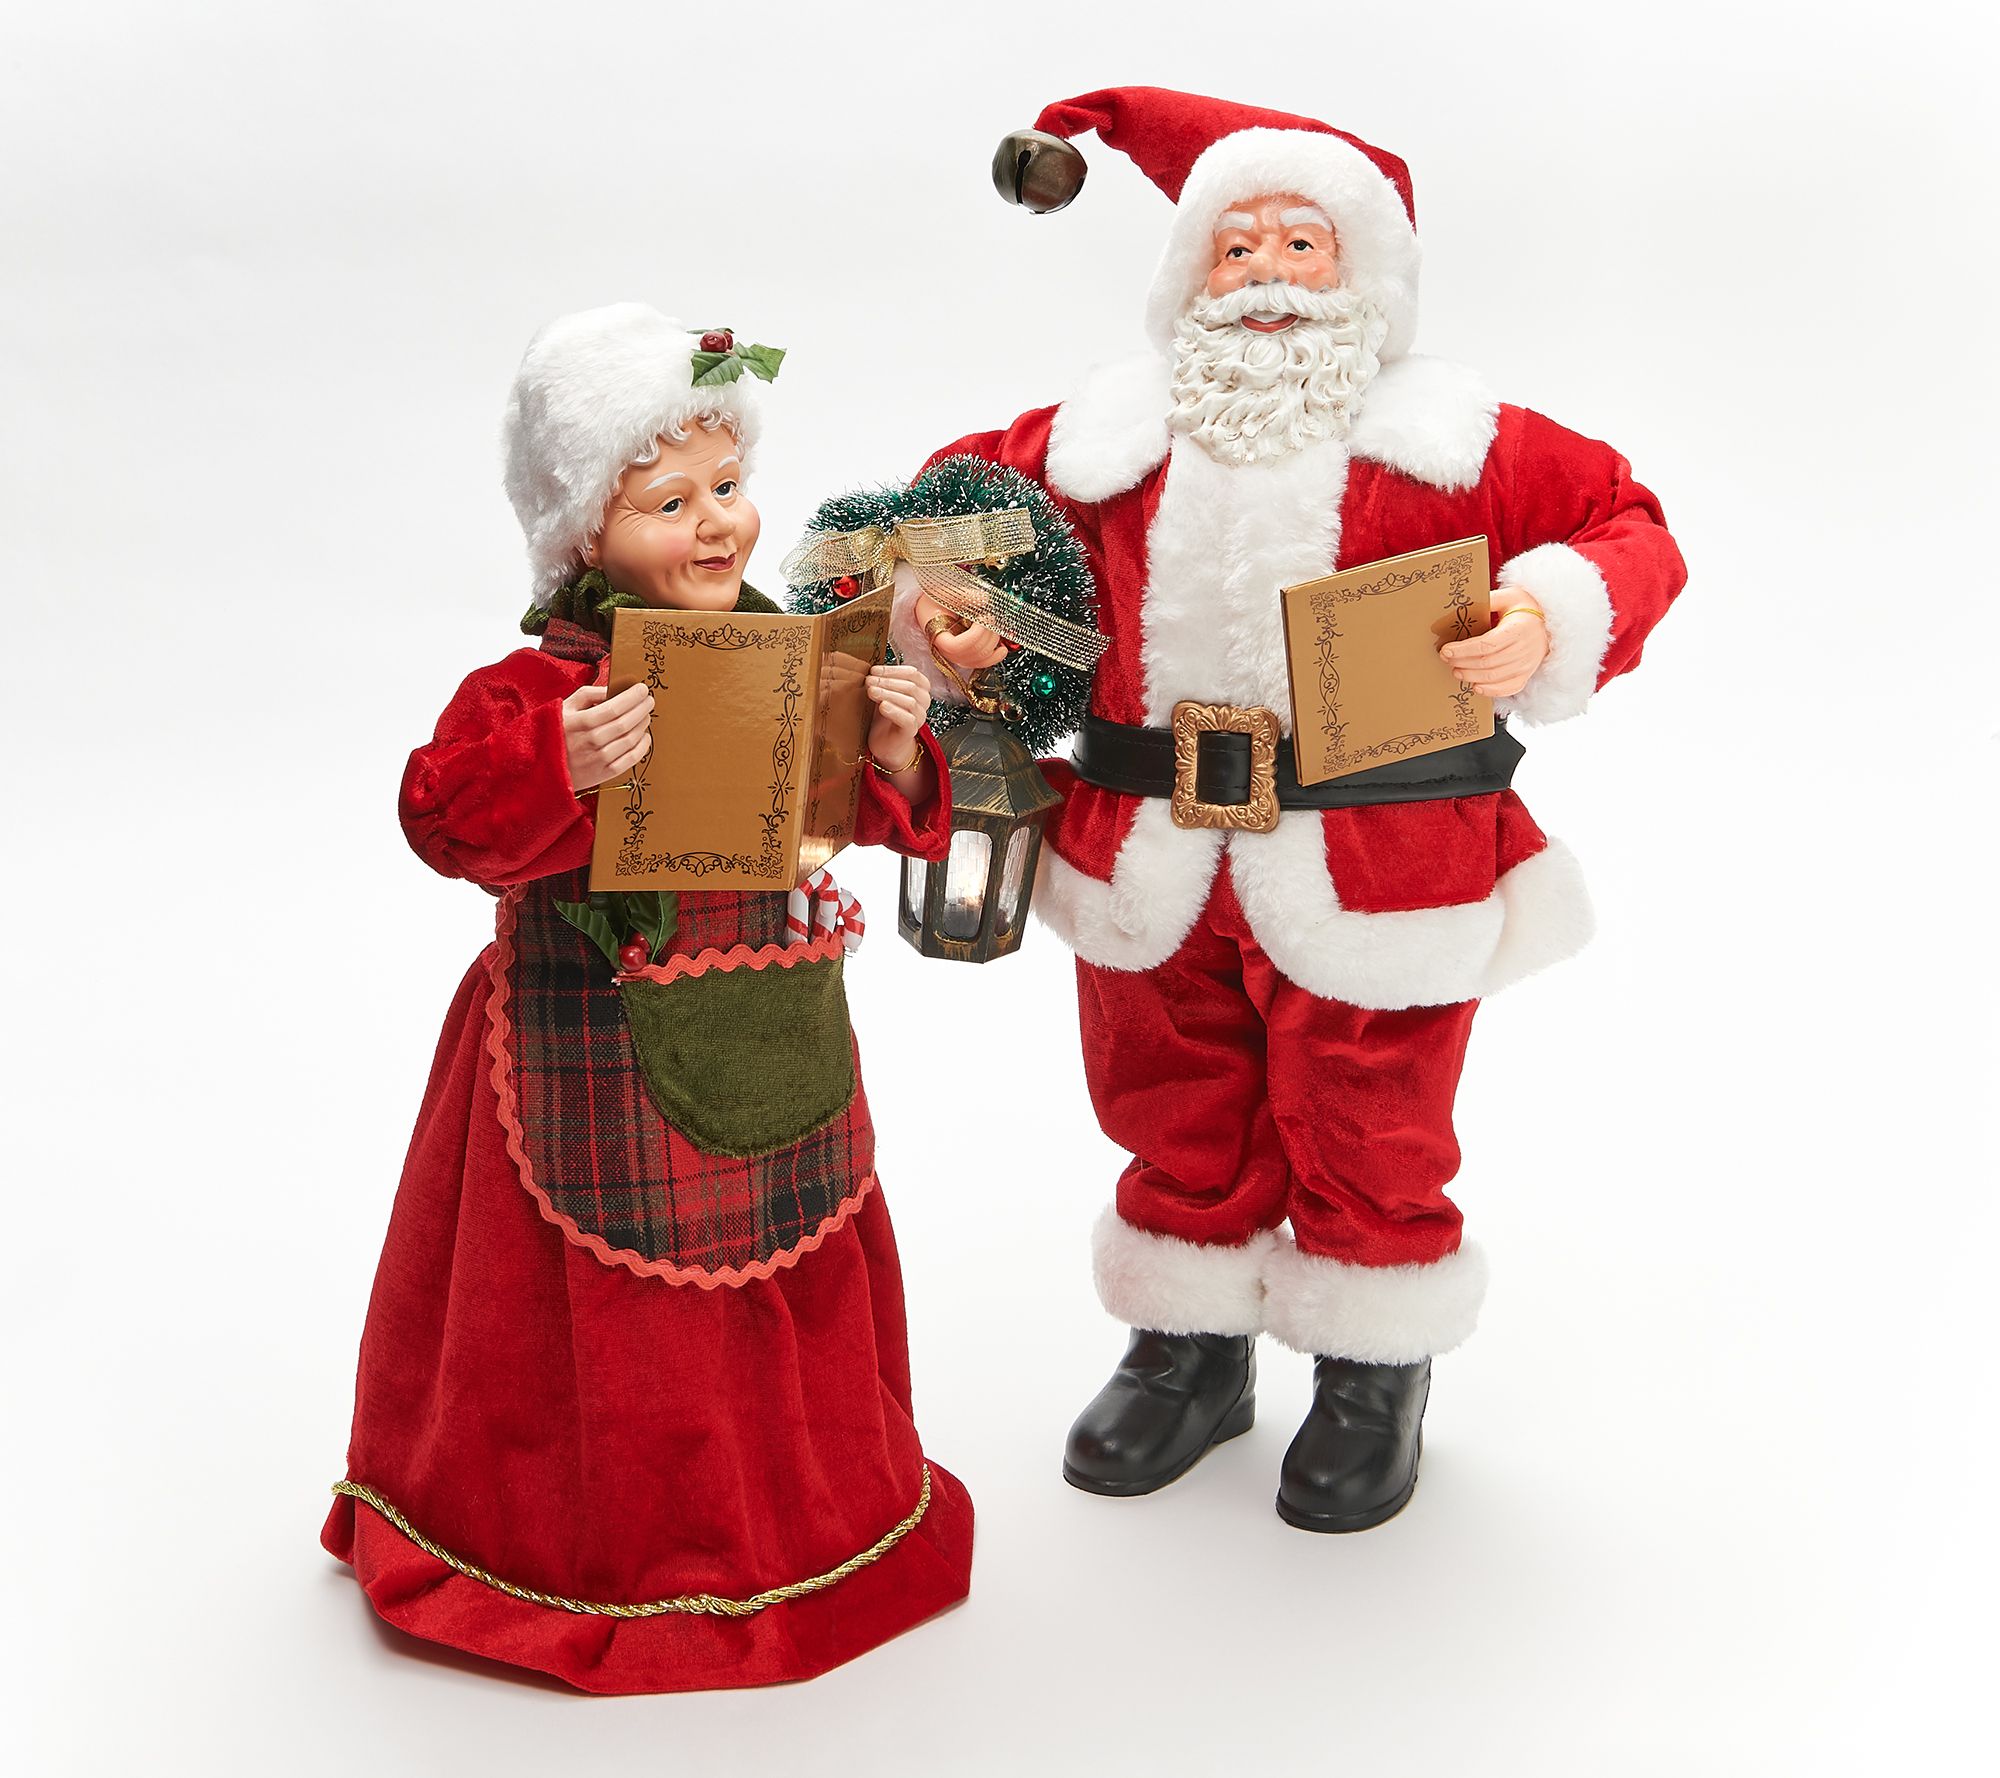 Set Of 2 Caroling Mr And Mrs Claus Figures By Valerie 1040